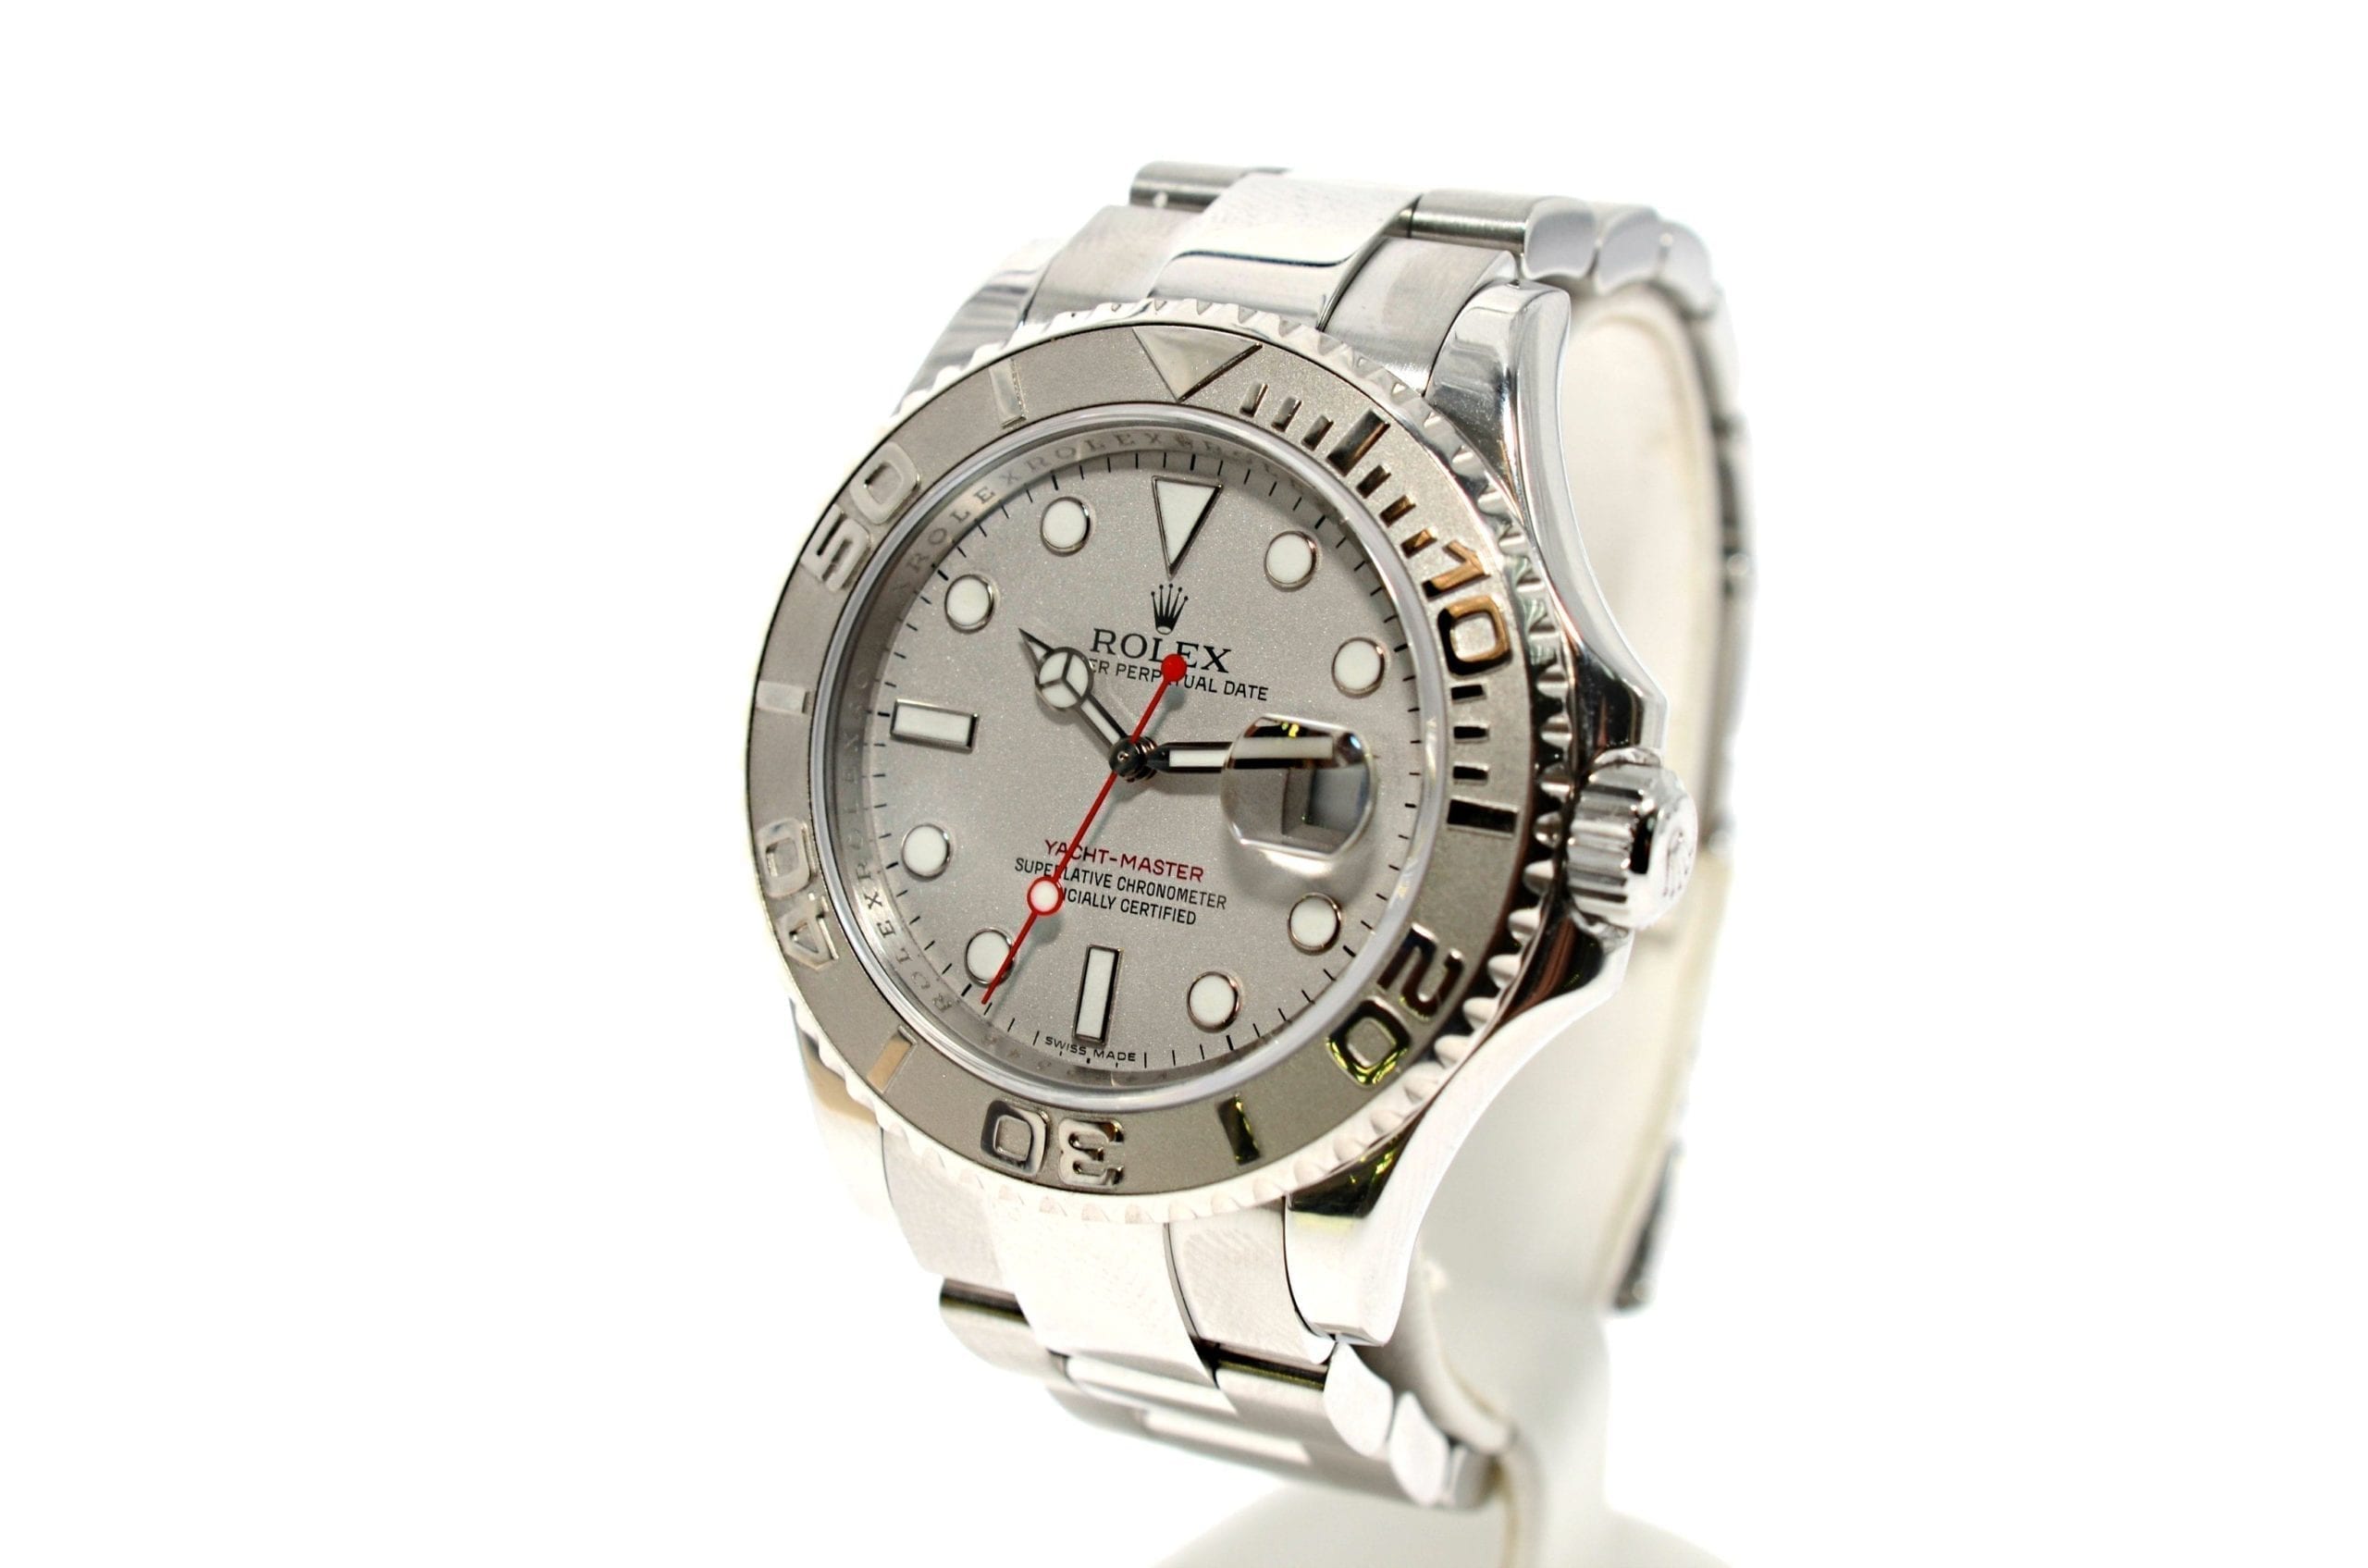 ROLEX OYSTER PERPETUAL 40MM MEN'S YACHT-MASTER 16622 STAINLESS STEEL& PLATINUM WATCH.